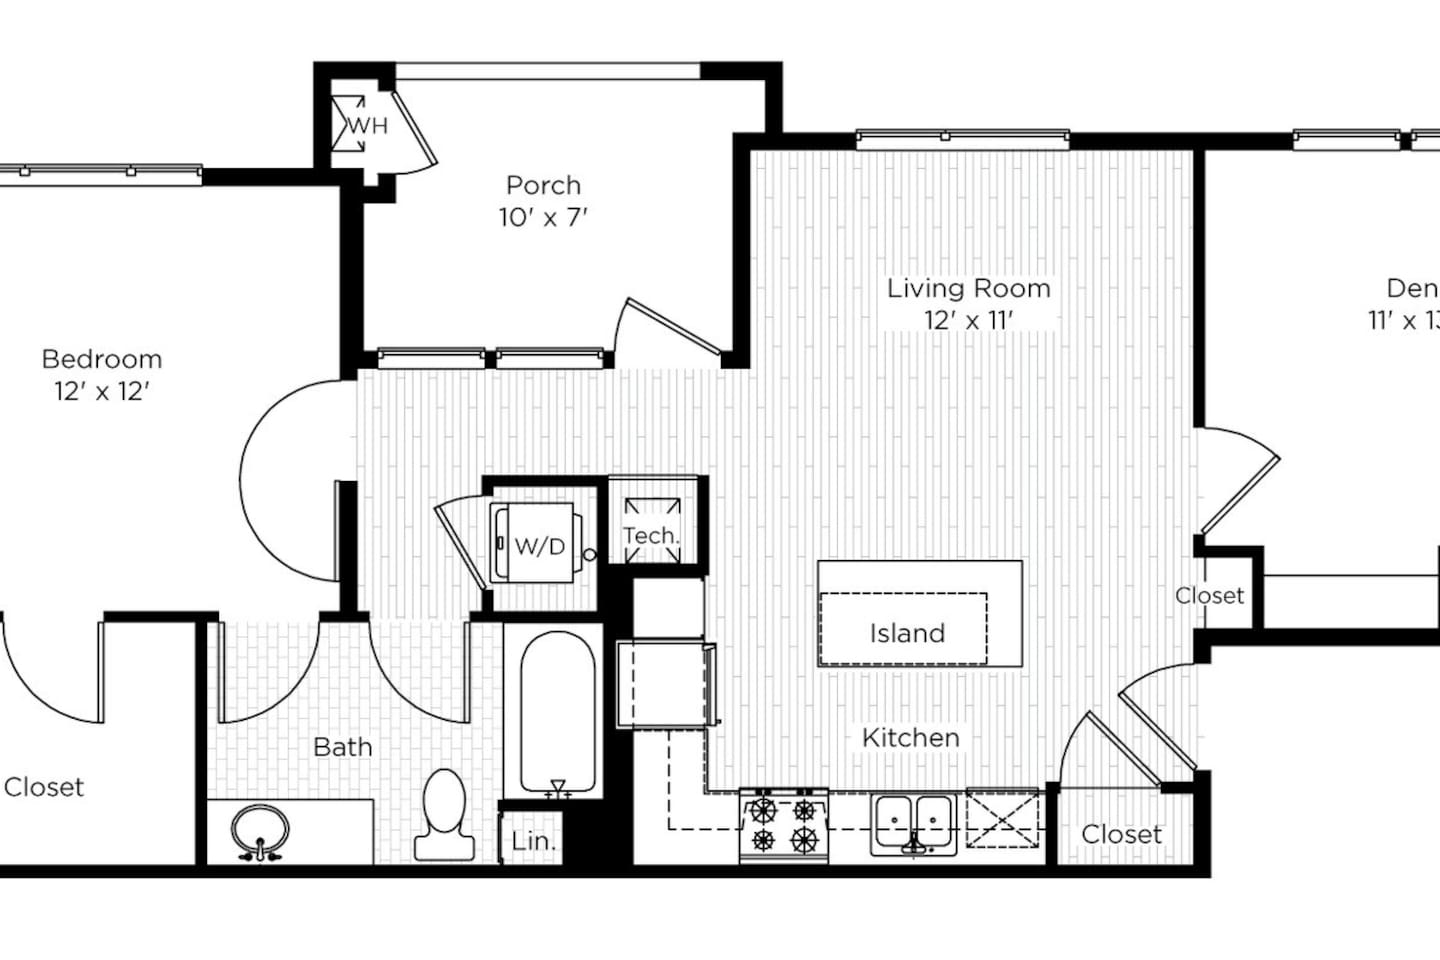 Floorplan diagram for The Aster North - 1EB, showing 1 bedroom